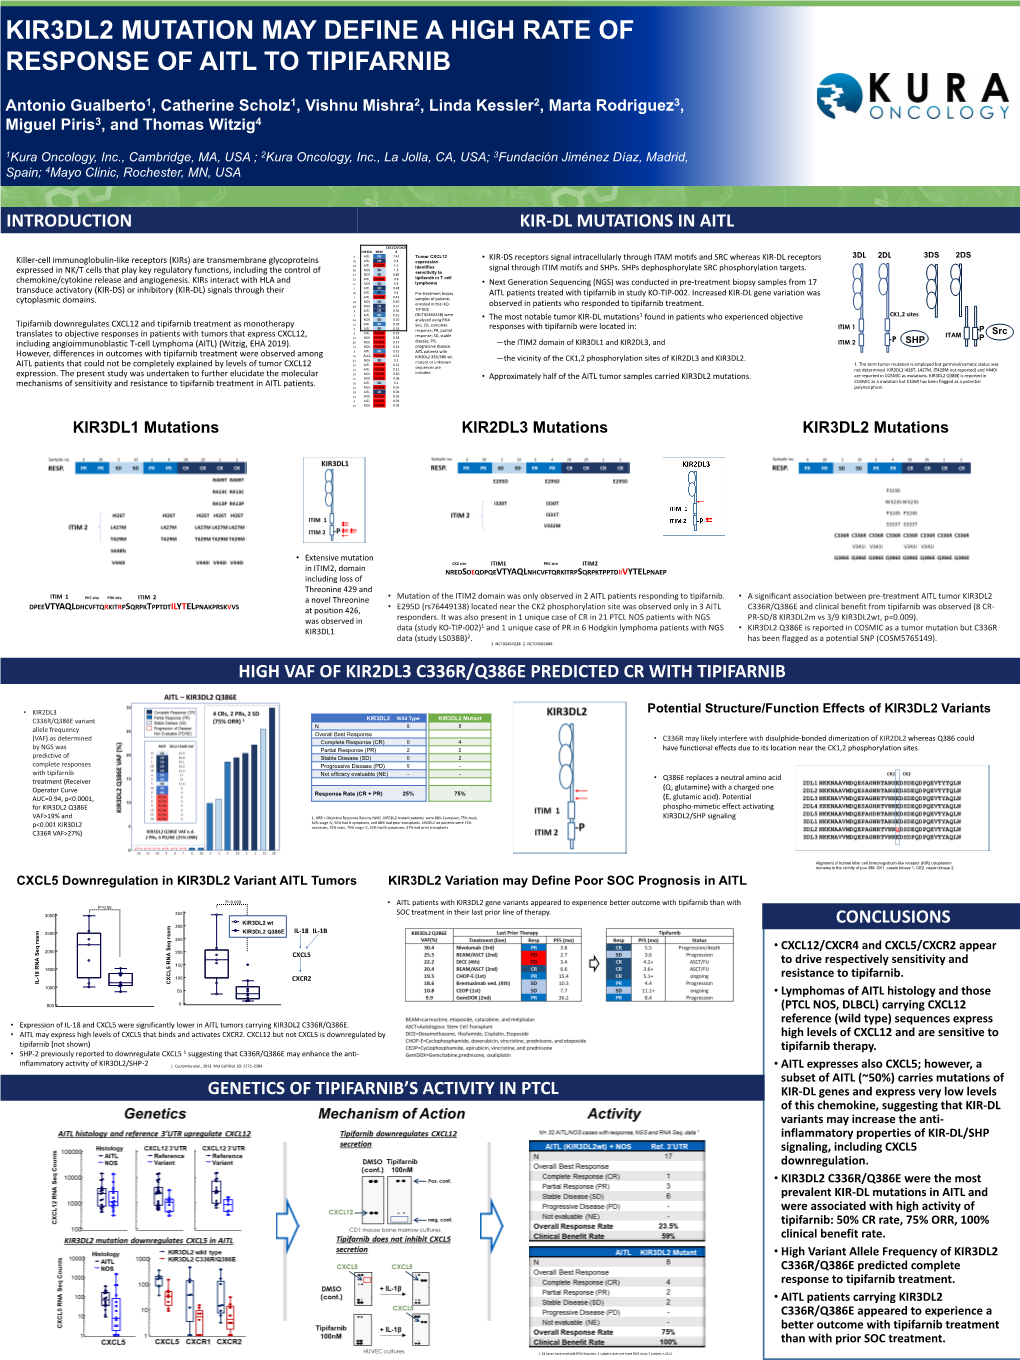 ICML 2019 Poster